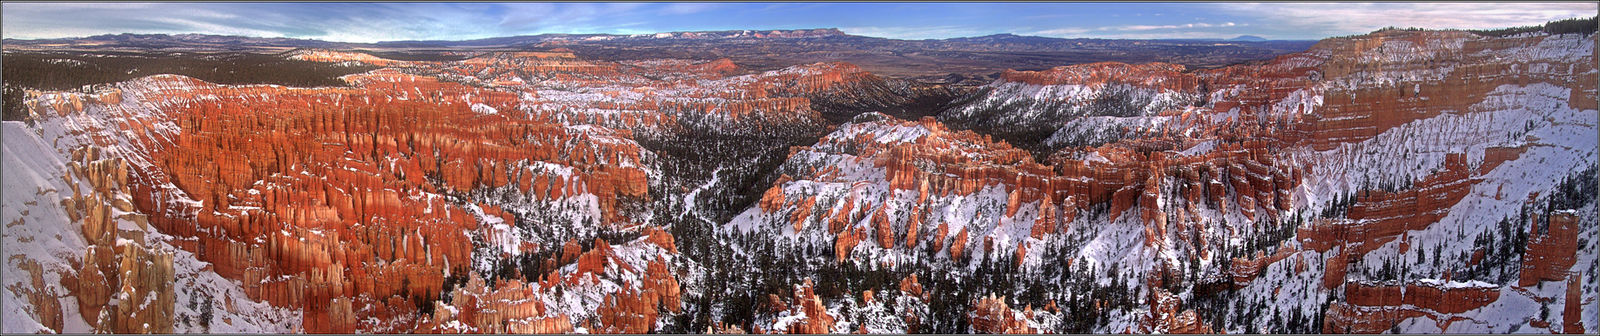 Bryce Canyon National Park Amphitheater (winter view)